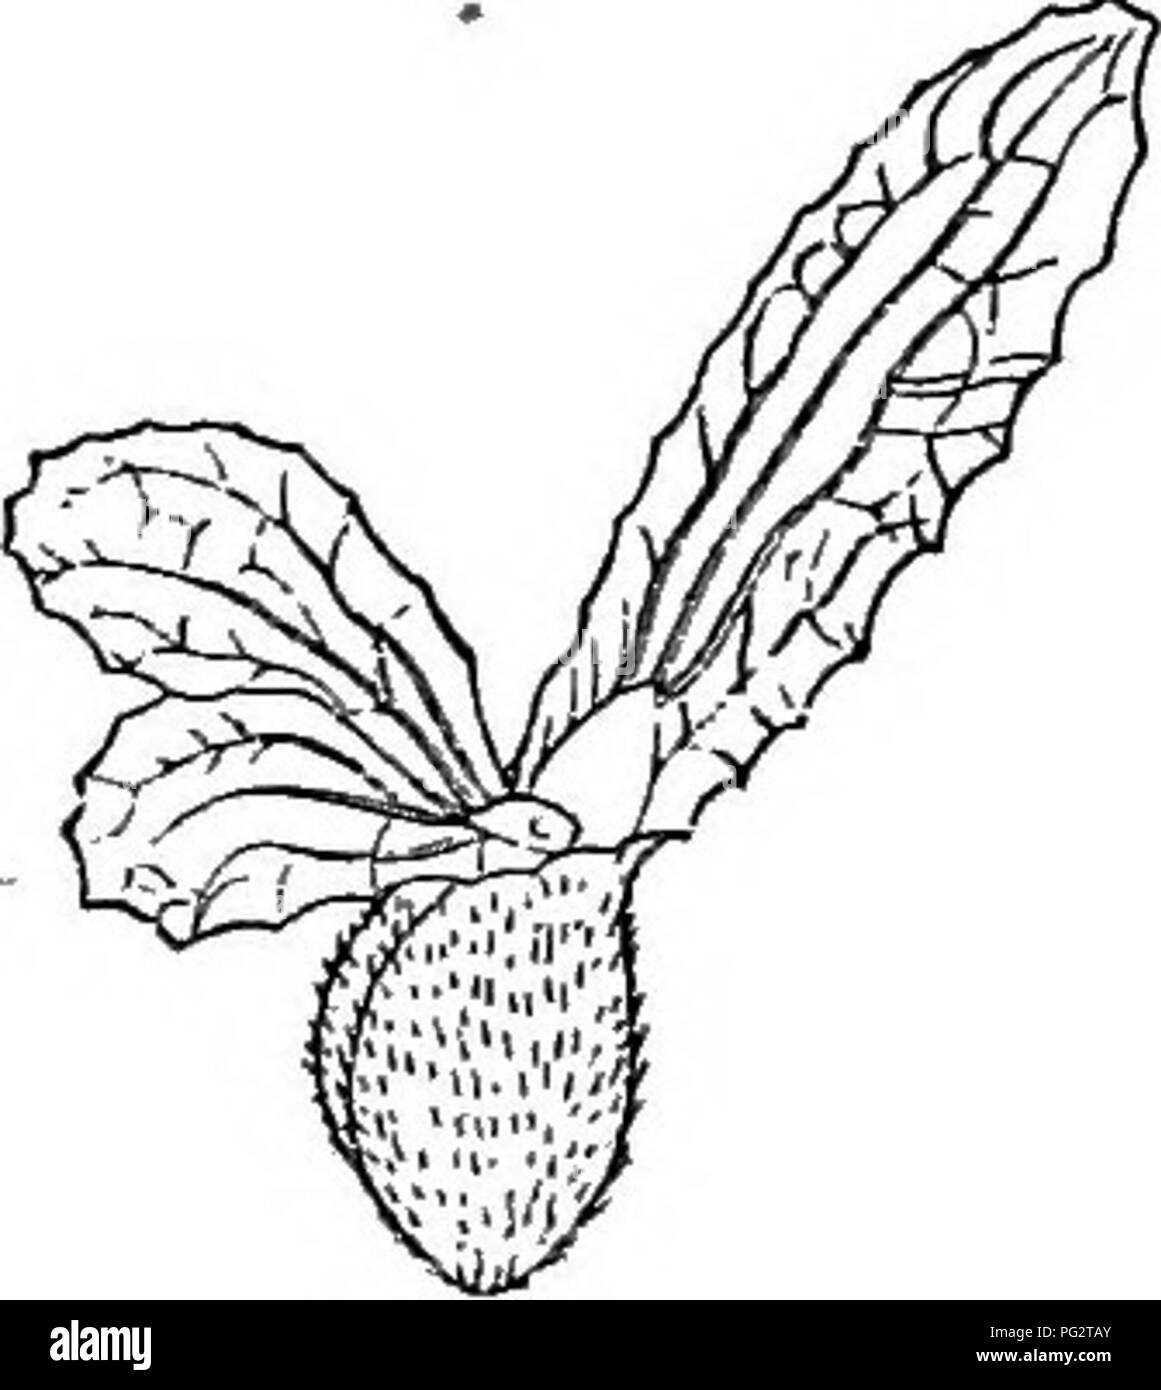 . The natural history of plants. Botany. Fig. 400. Flower (f). limb of variable form. The attenuated summit of the stem or of some of its divisions is terminated by a floral group i resembling a capitule but in reaUty formed of compound cymes with short .pedicels and free or slightly connate bracts.^ Beside Nardostachys is placed Patrinia (fig. 400), perennial herba of central and eastern Asia, having flowers with a corolla somewhat less irregular, four stamens, a short calycinal collarette, entire or very shghtly dentate, oblique or unequal; the flowers, yellow or white, united in compound co Stock Photo